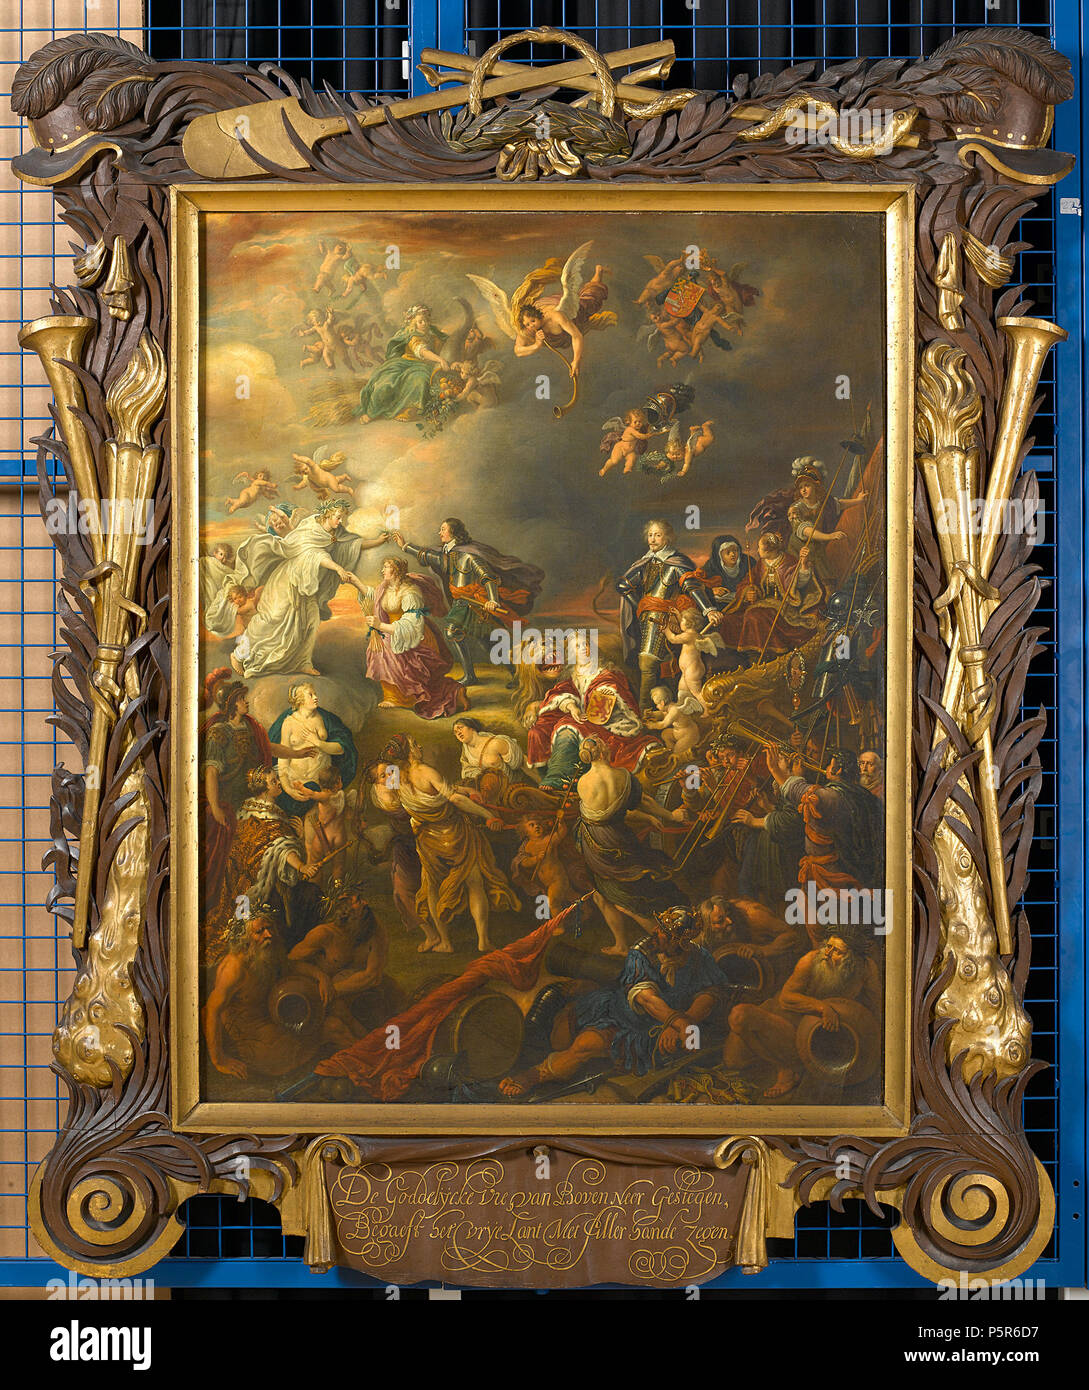 Allegory of the Peace under Stadtholder William II . Allegory of the Peace under Stadtholder William II. From the right the triumphal chariot of Concord with Frederick Henry, Prince of Orange, is being pulled in by four virgins (Righteousness, Pride, Justice and Prudence). On the chariot Frederick Henry is accompanied by allegories of Freedom, Religion, Victory and the Dutch Republic as well as the Dutch Lion. To the right the chariot is being followed by musicians. Three godesses (Minerva, Venus and Juno) are lying in wait for the chariot. Bottom right War is lying on the ground chained in be Stock Photo